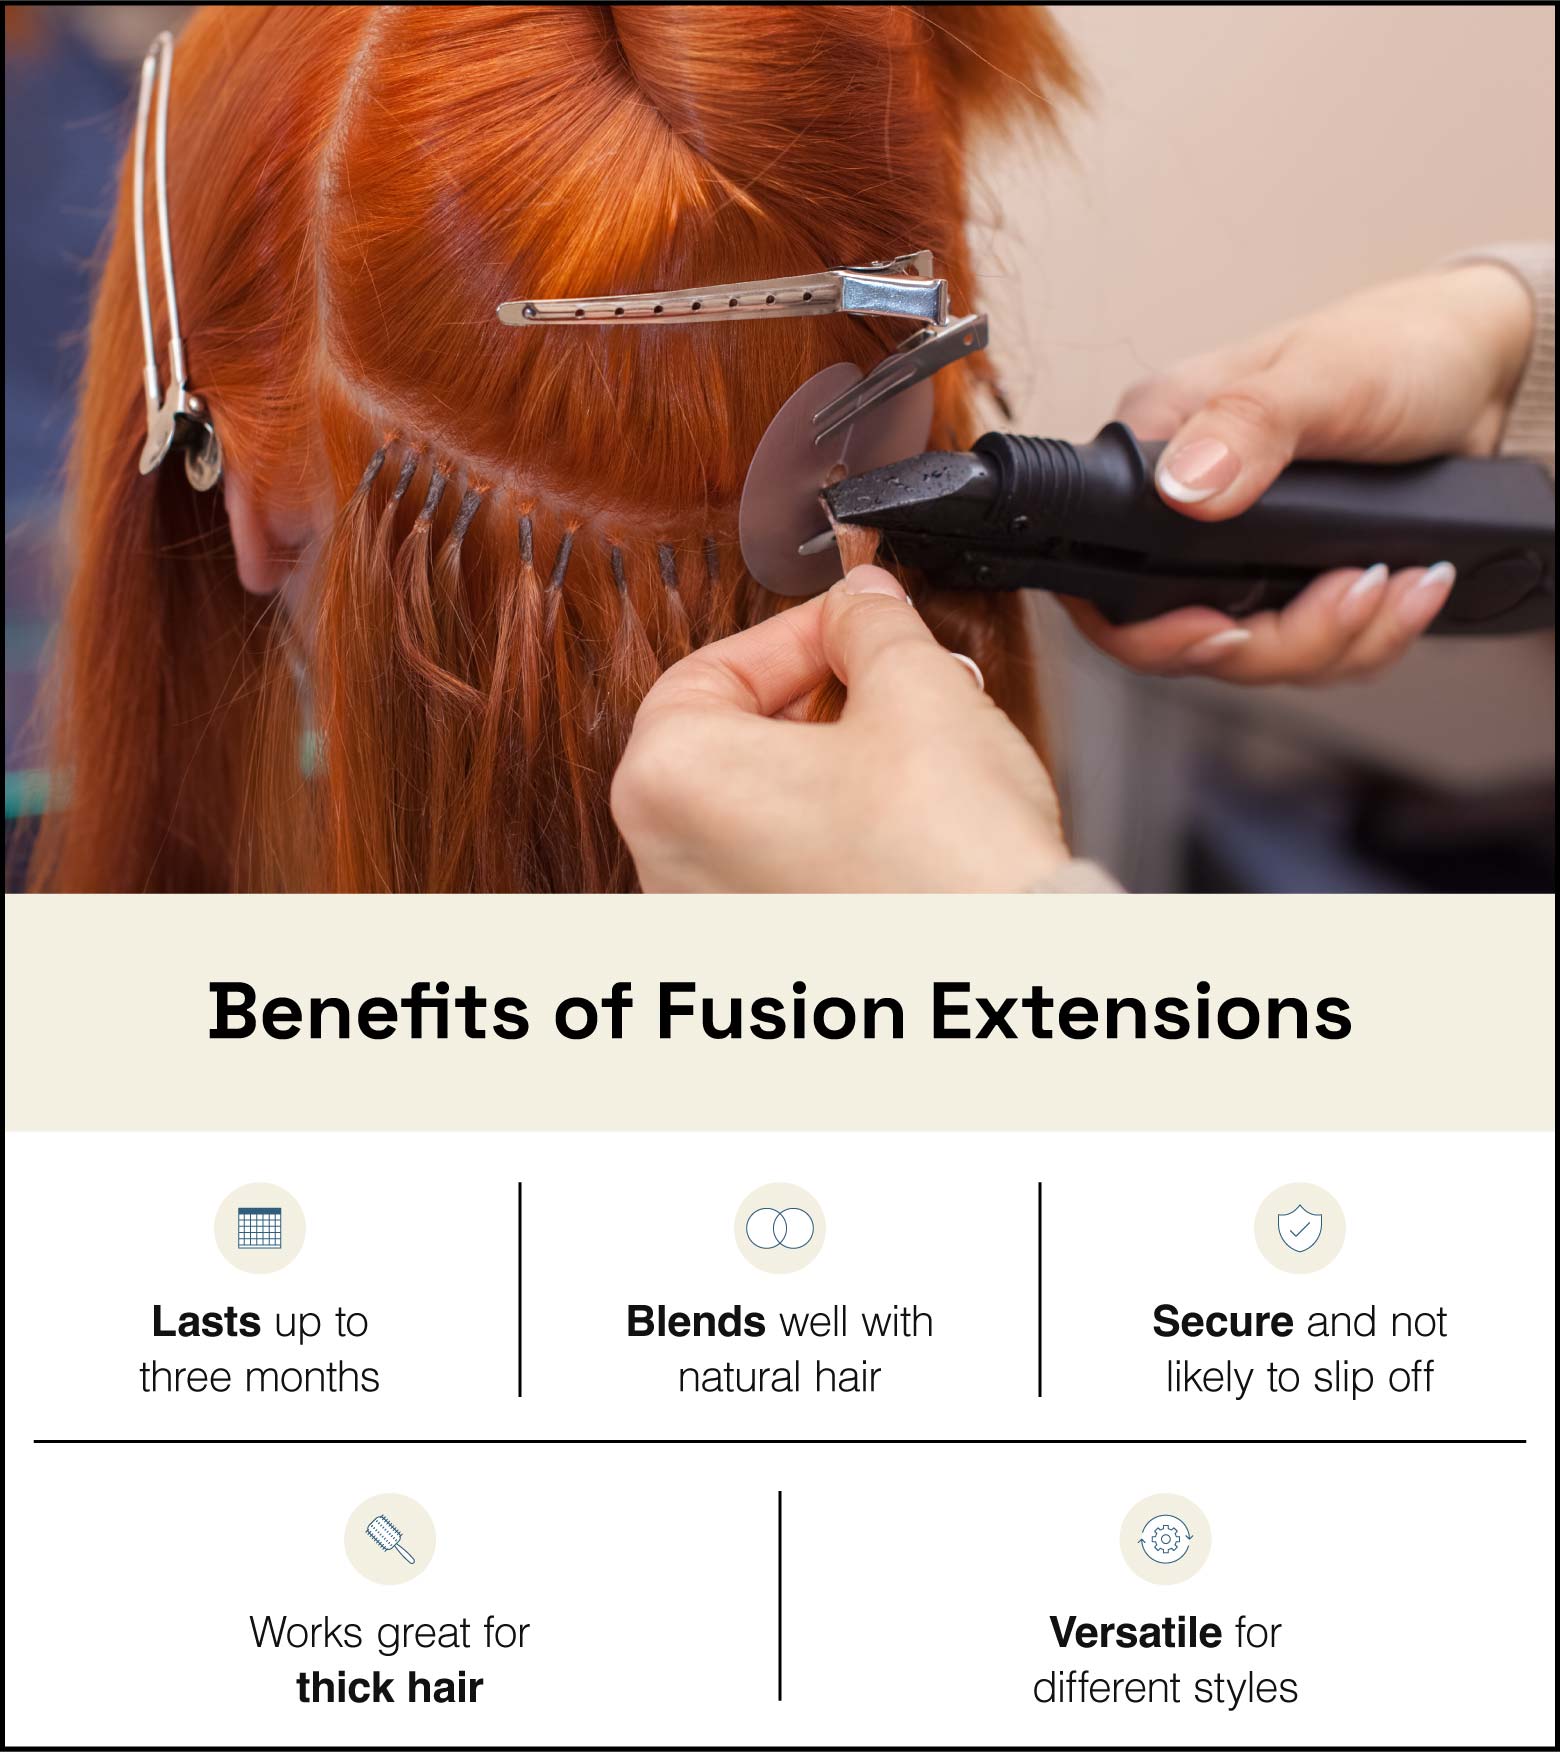 Image of stylist fusing hair extensions to client with keratin beads with text below outlining benefits of fusion extensions.